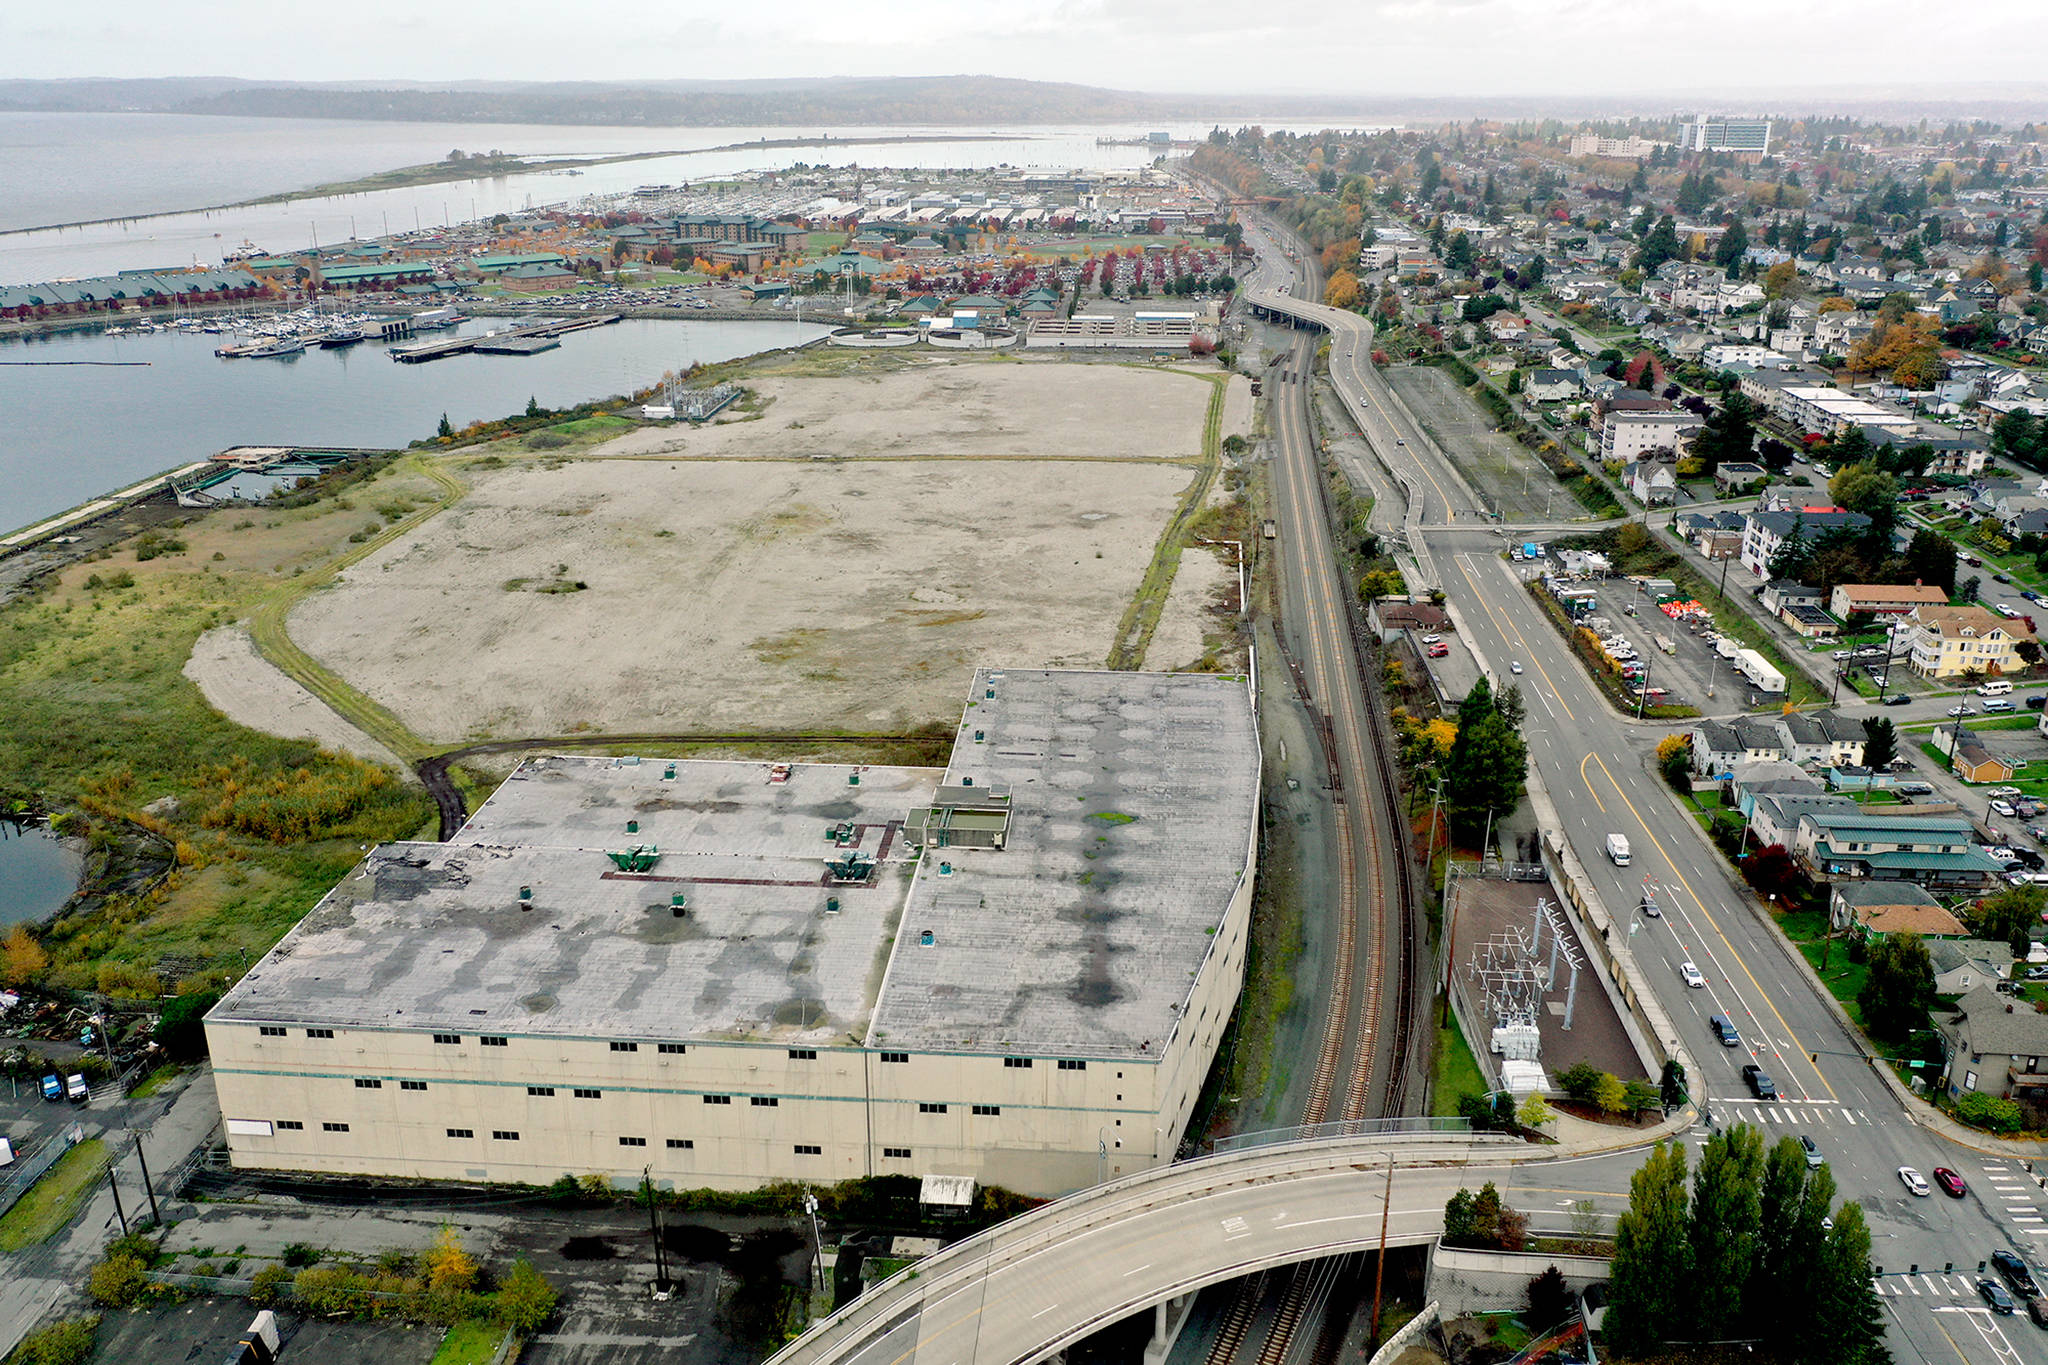 The warehouse (lower left) and vacant land of the former Kimberly-Clark paper mill on the Everett waterfront, as seen Oct. 22. (Chuck Taylor / The Herald)